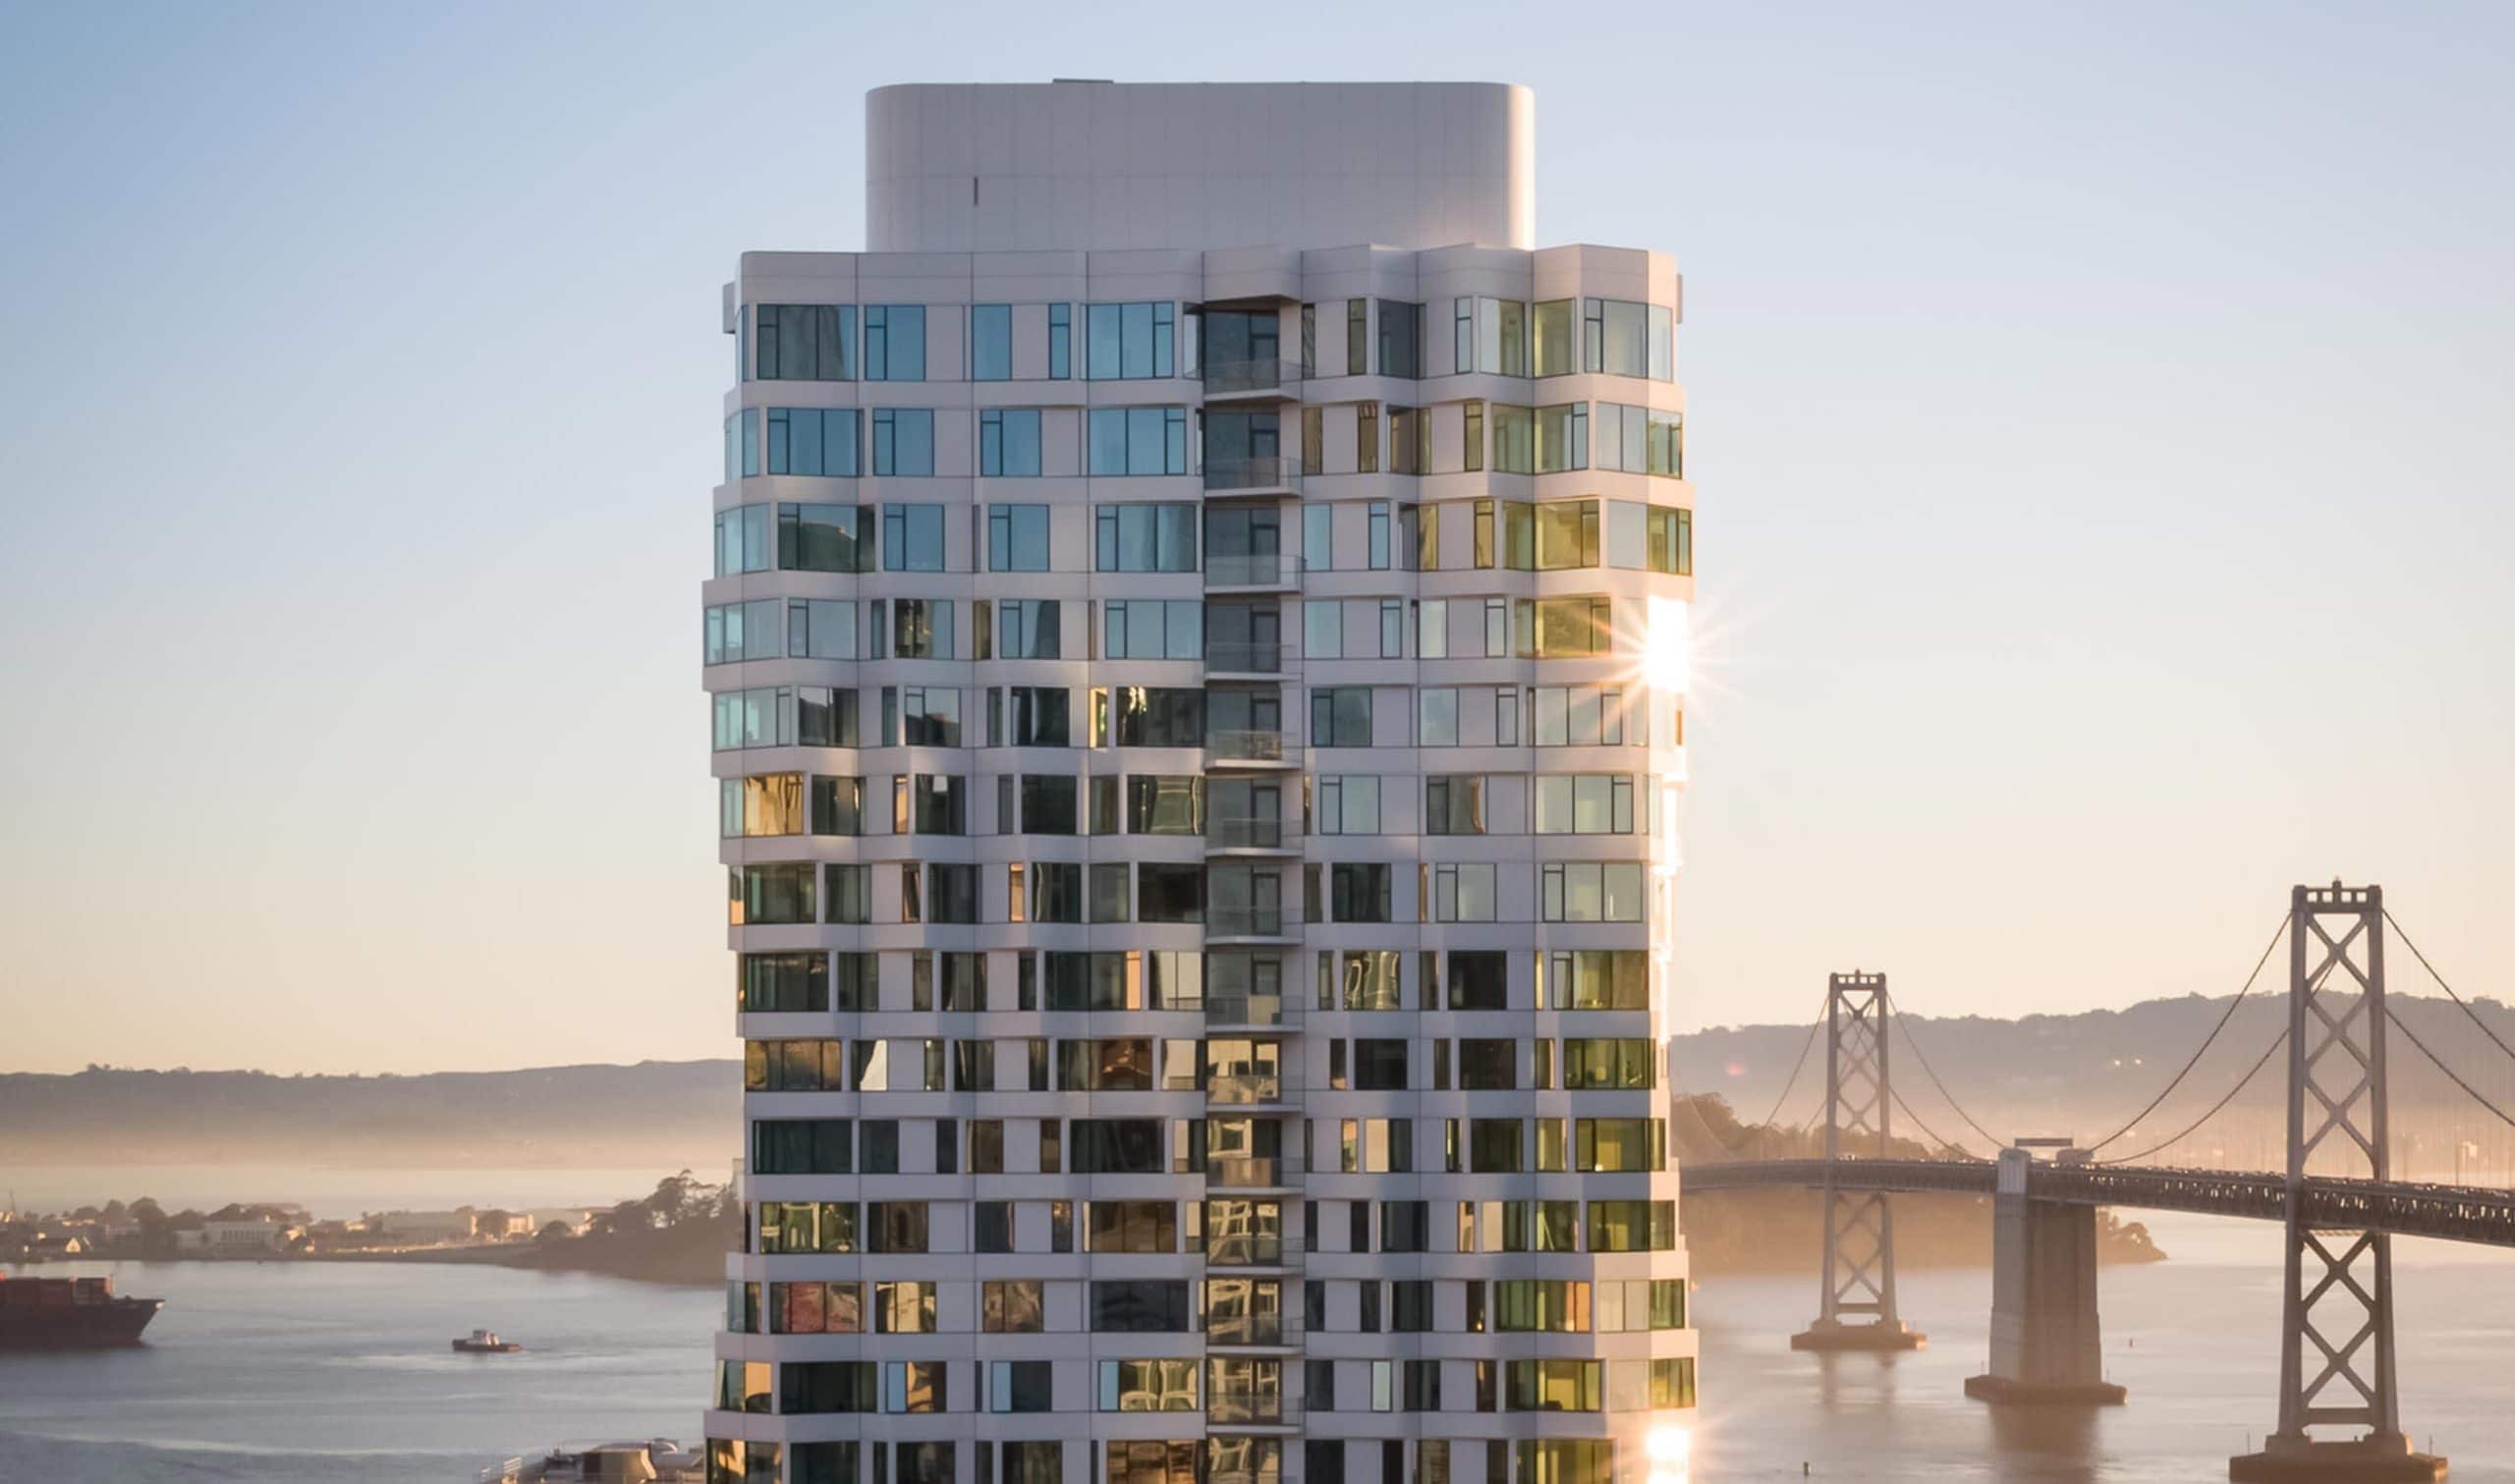 Superman view of Mira Tower luxury residences in San Francisco. Spiral tower with Bay Bridge in the background at sunrise.